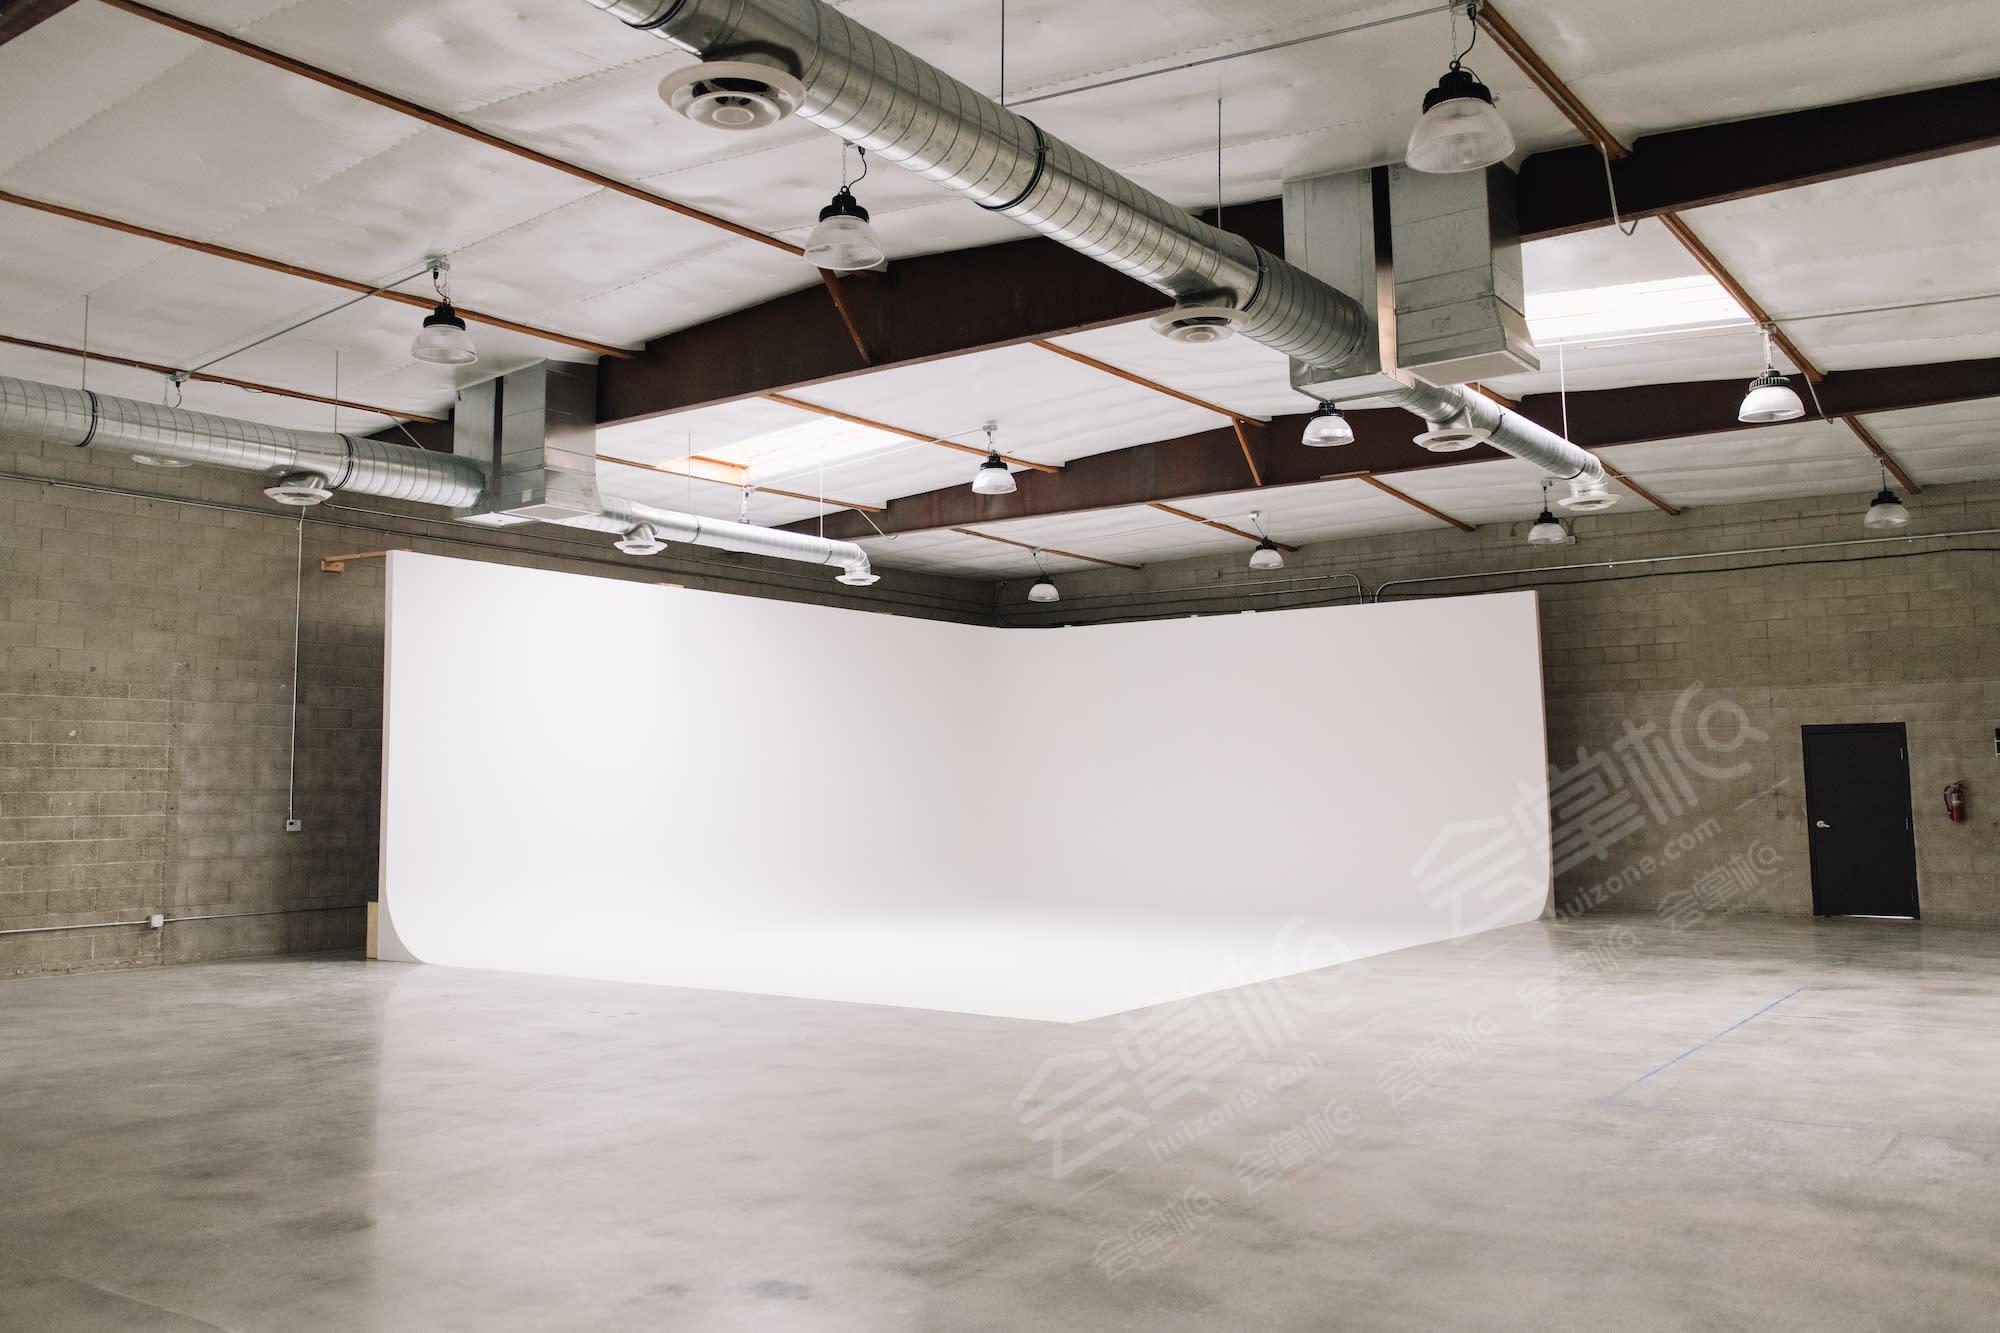 West LA 5000 sq/ft Photo/Video Studio with Natural Light Cyc